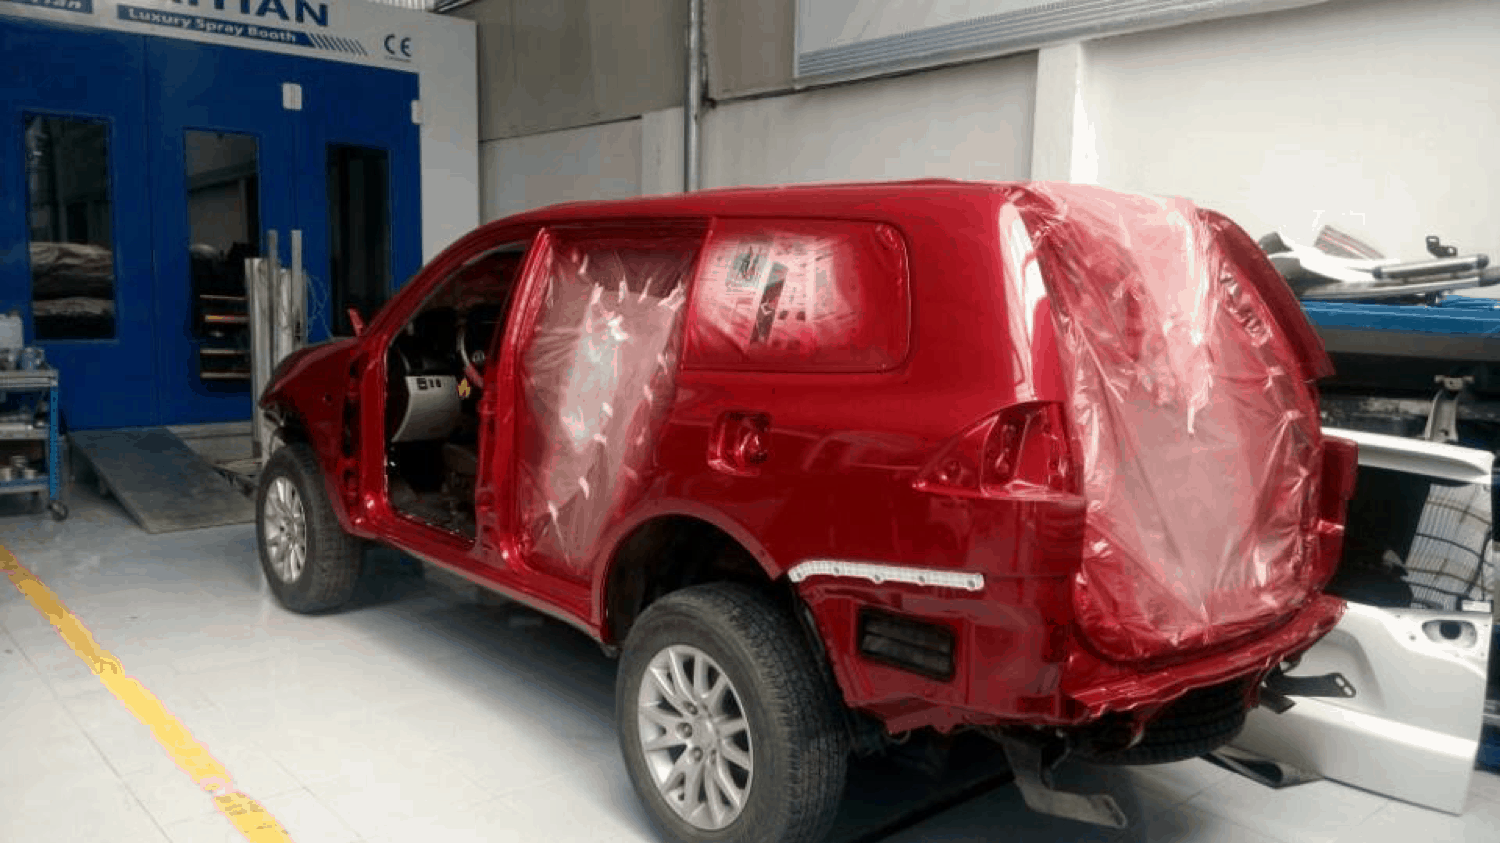 High-class New Car Body Paint Service, Thanh Phong Auto Ho Chi Minh City 2023